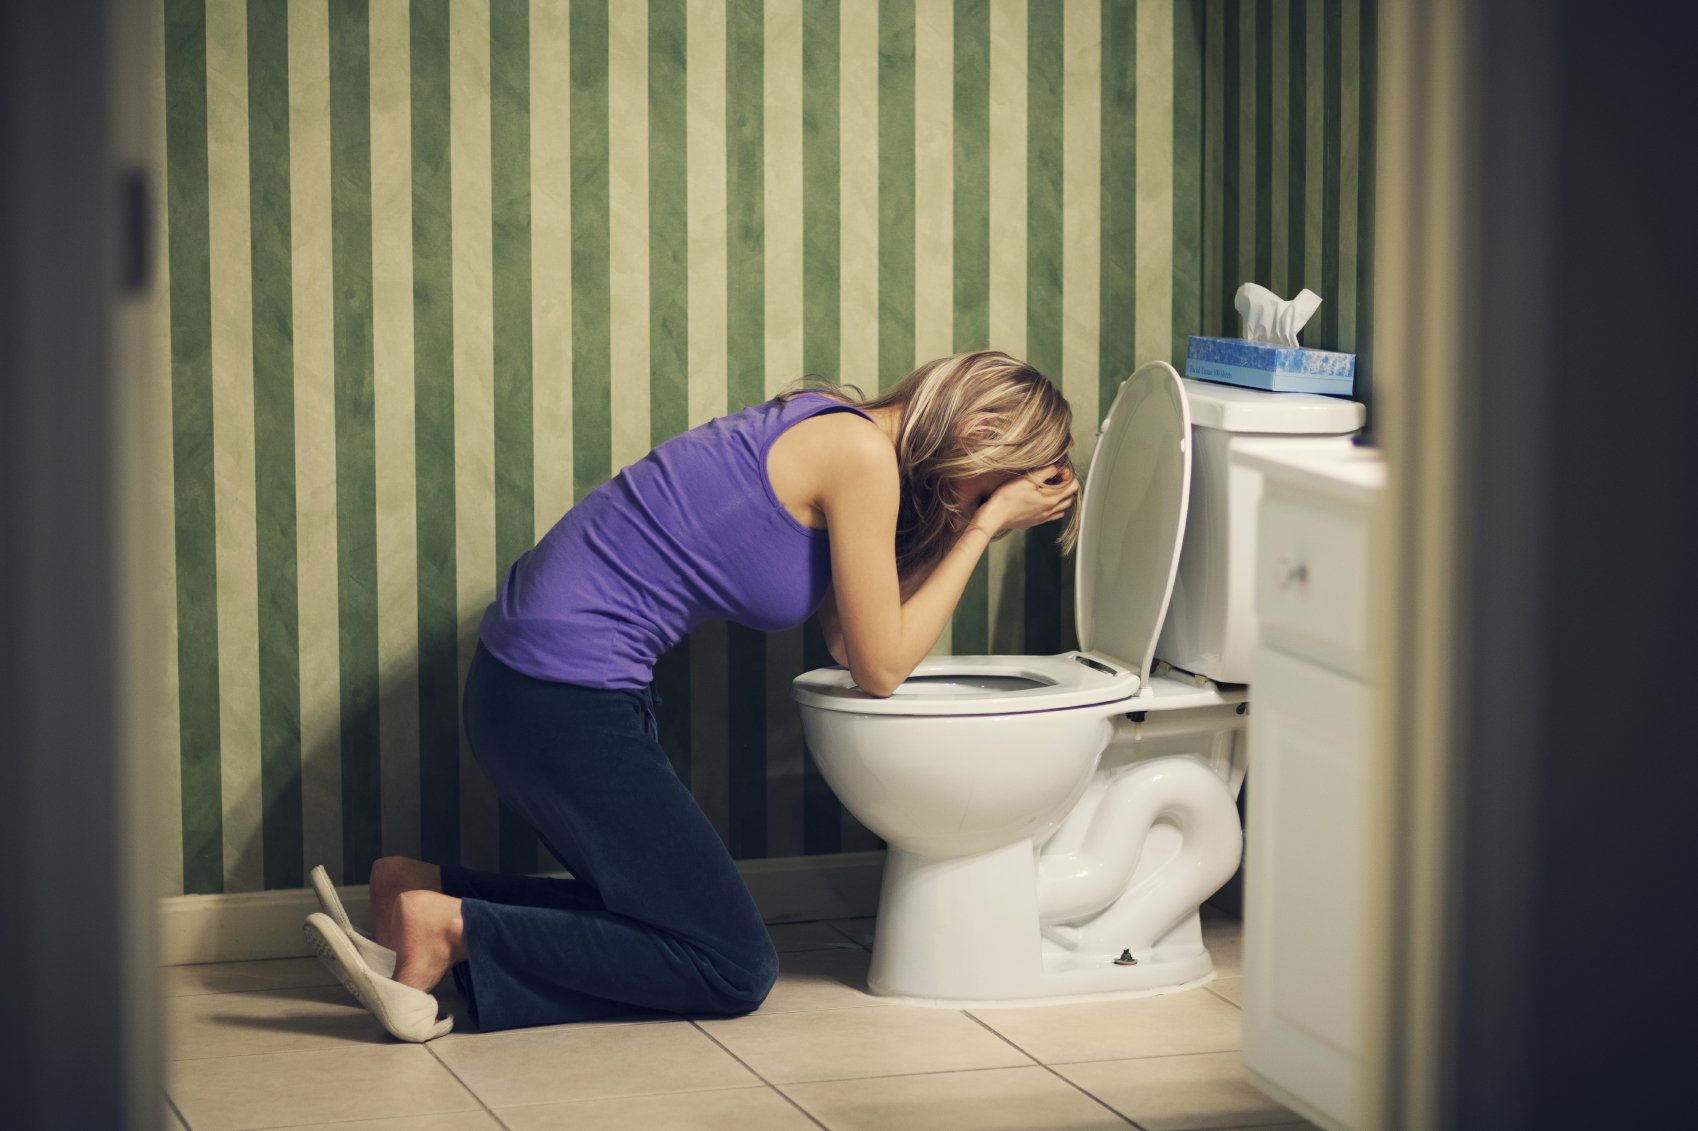 vomiting from cancer treatment can be prevented and managed